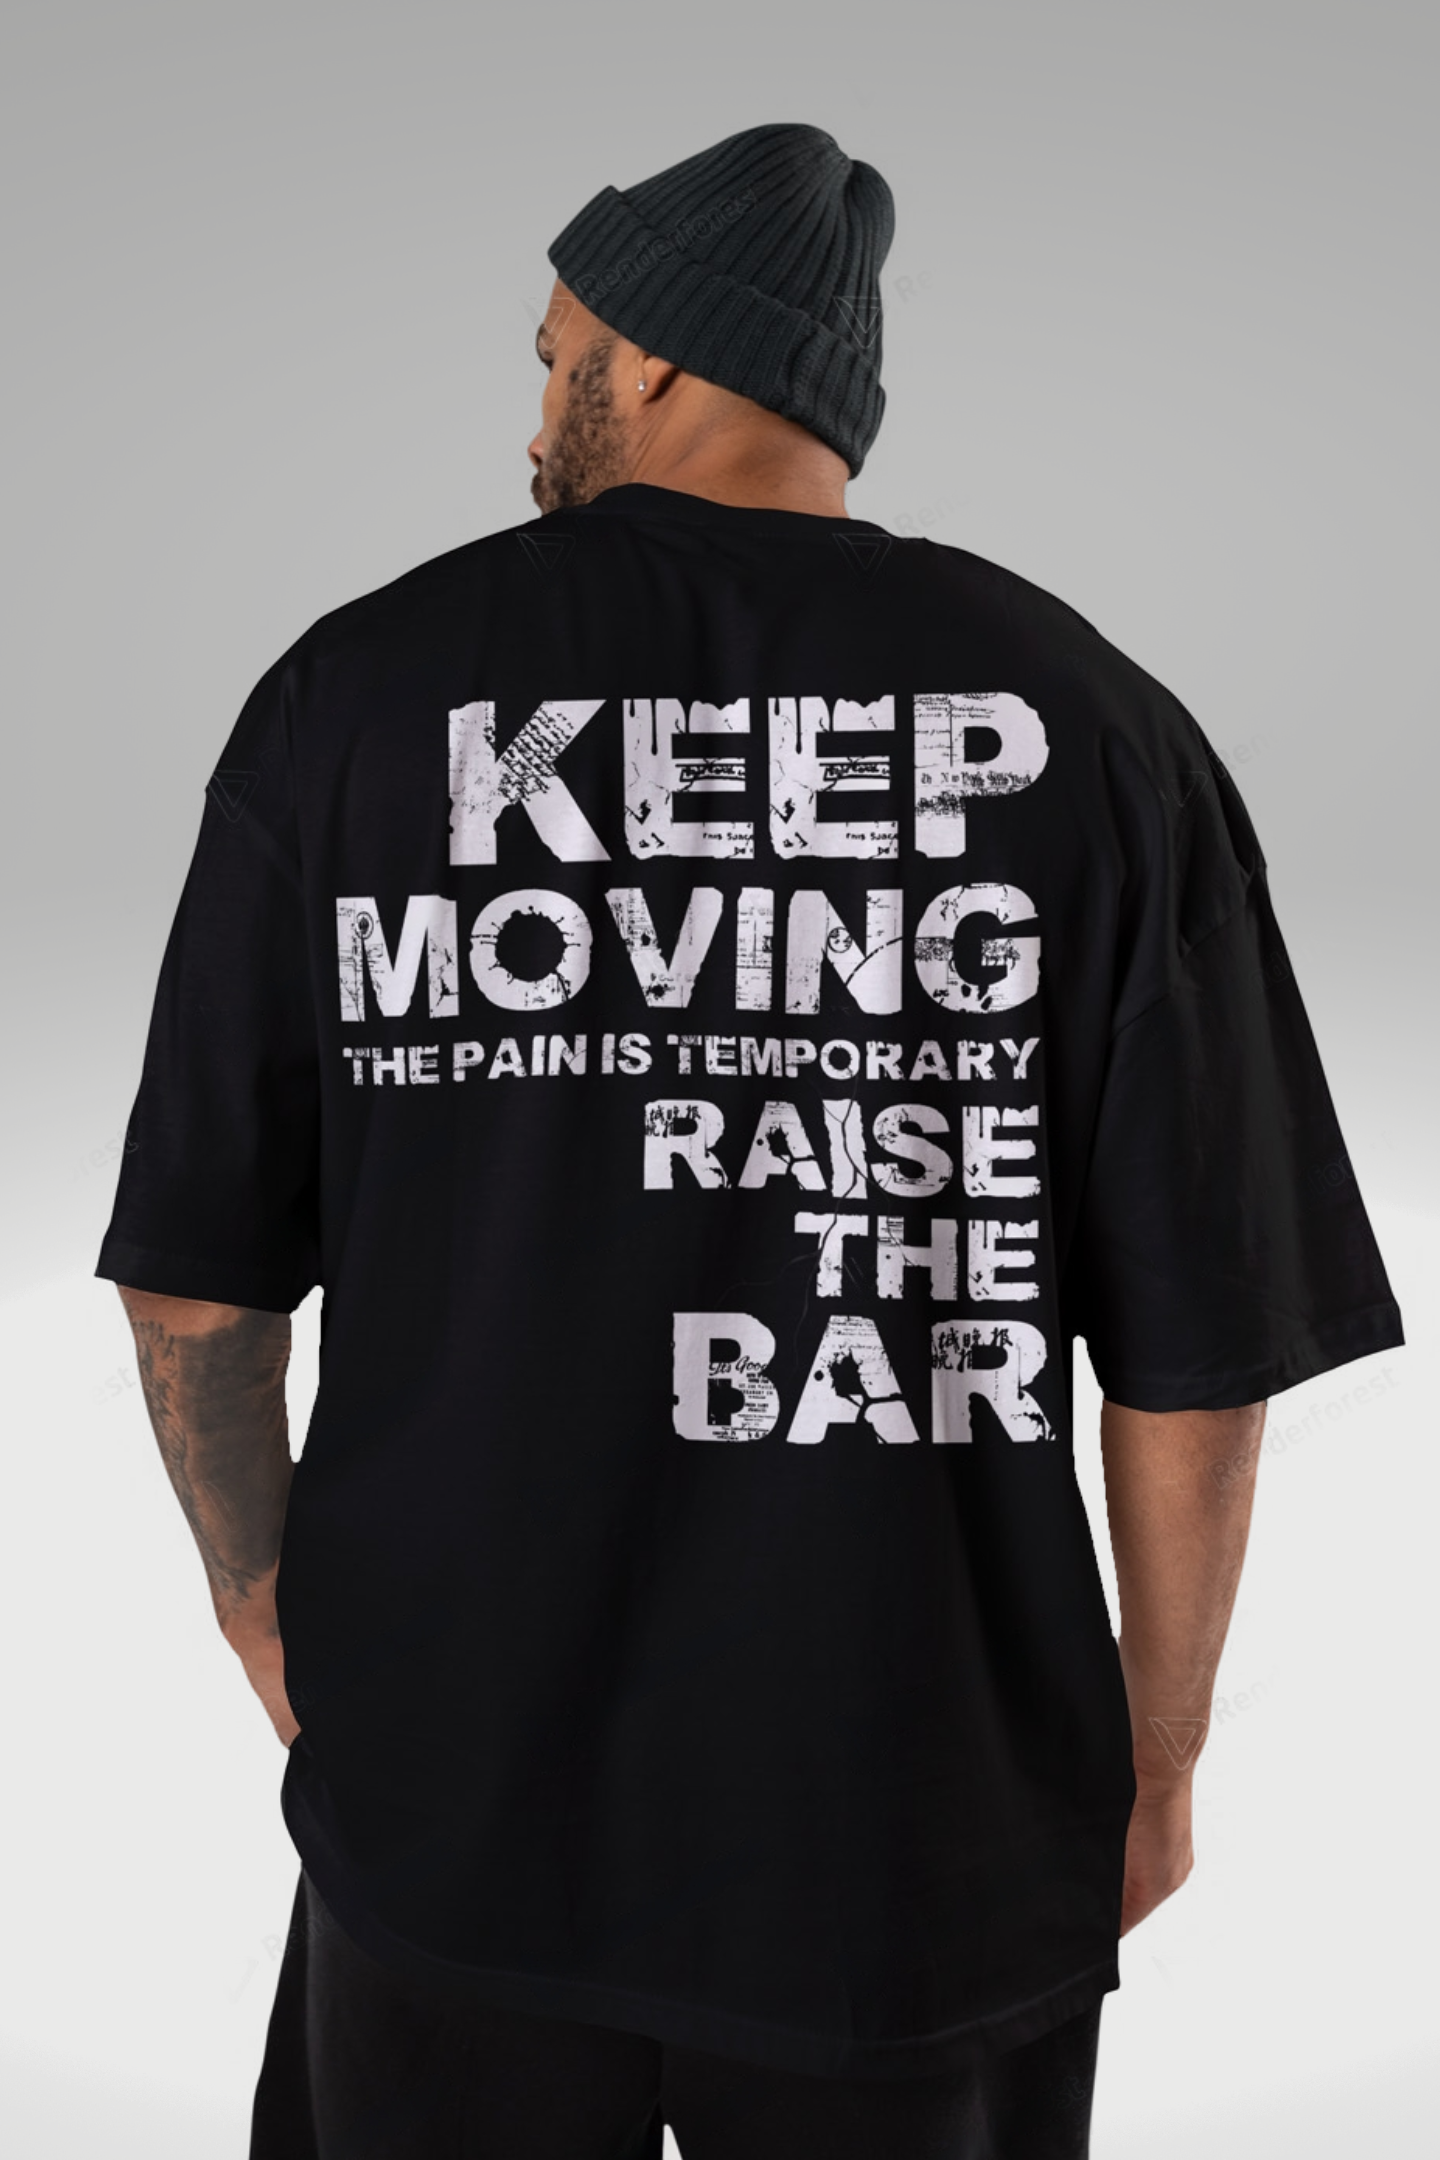 Raise the bar - Gym Oversized T Shirt Strong Soul Shirts & Tops